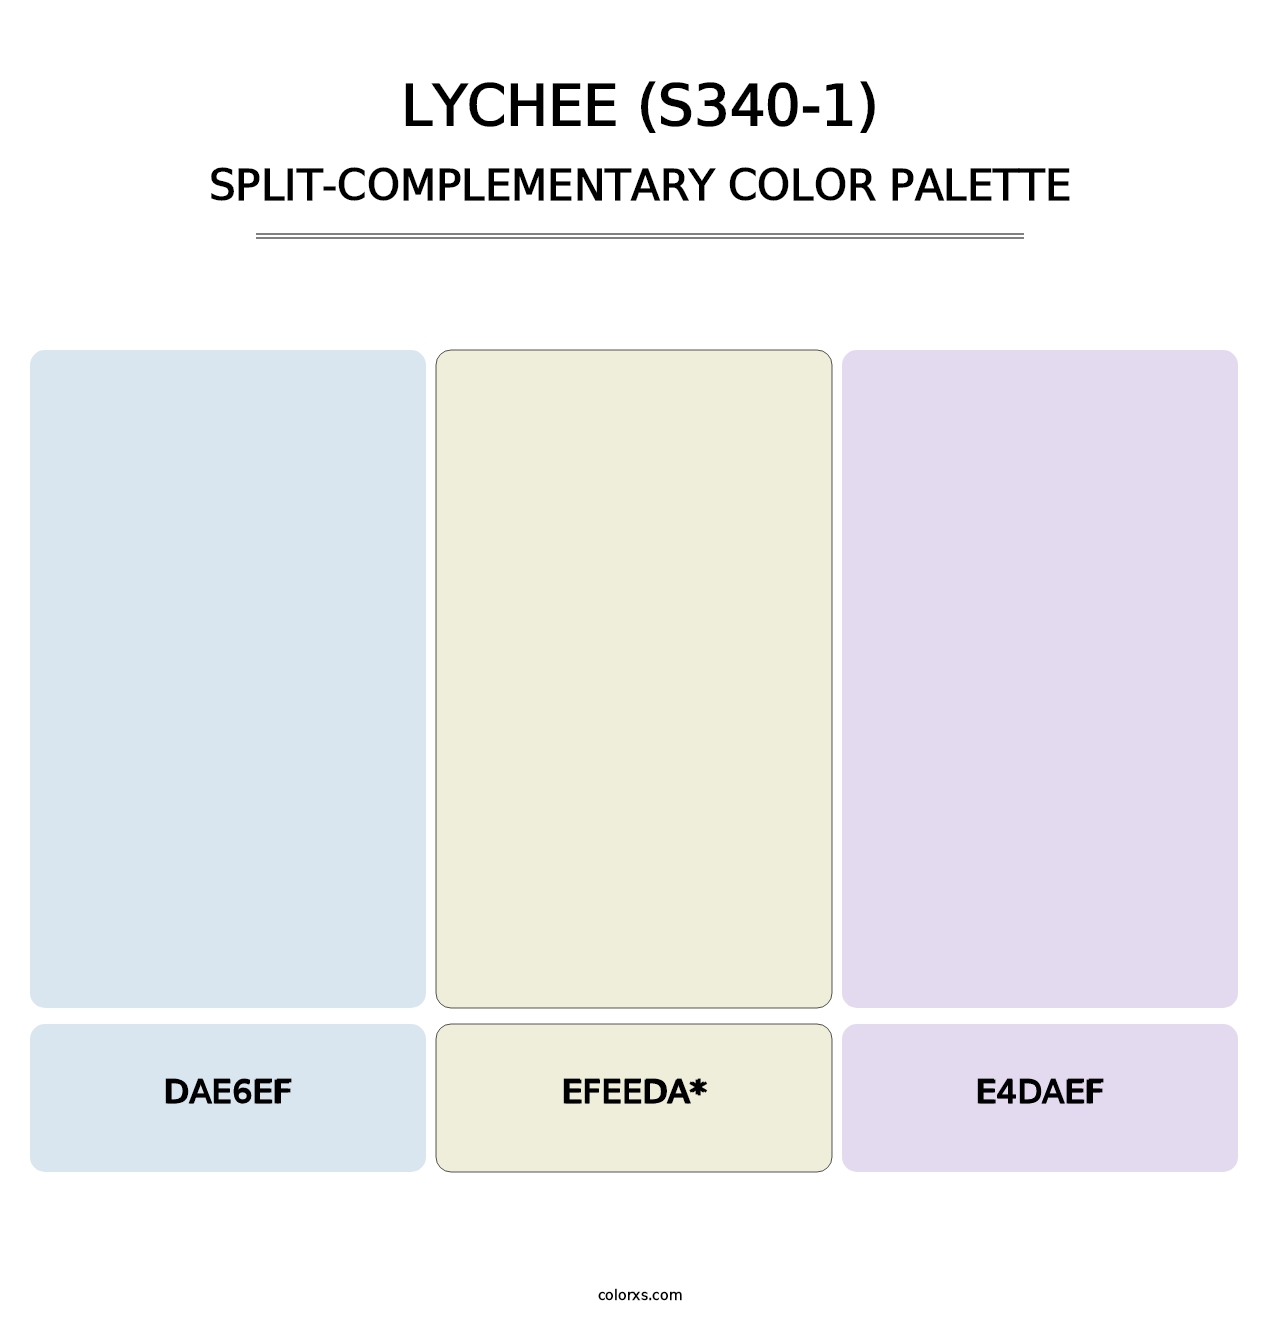 Lychee (S340-1) - Split-Complementary Color Palette